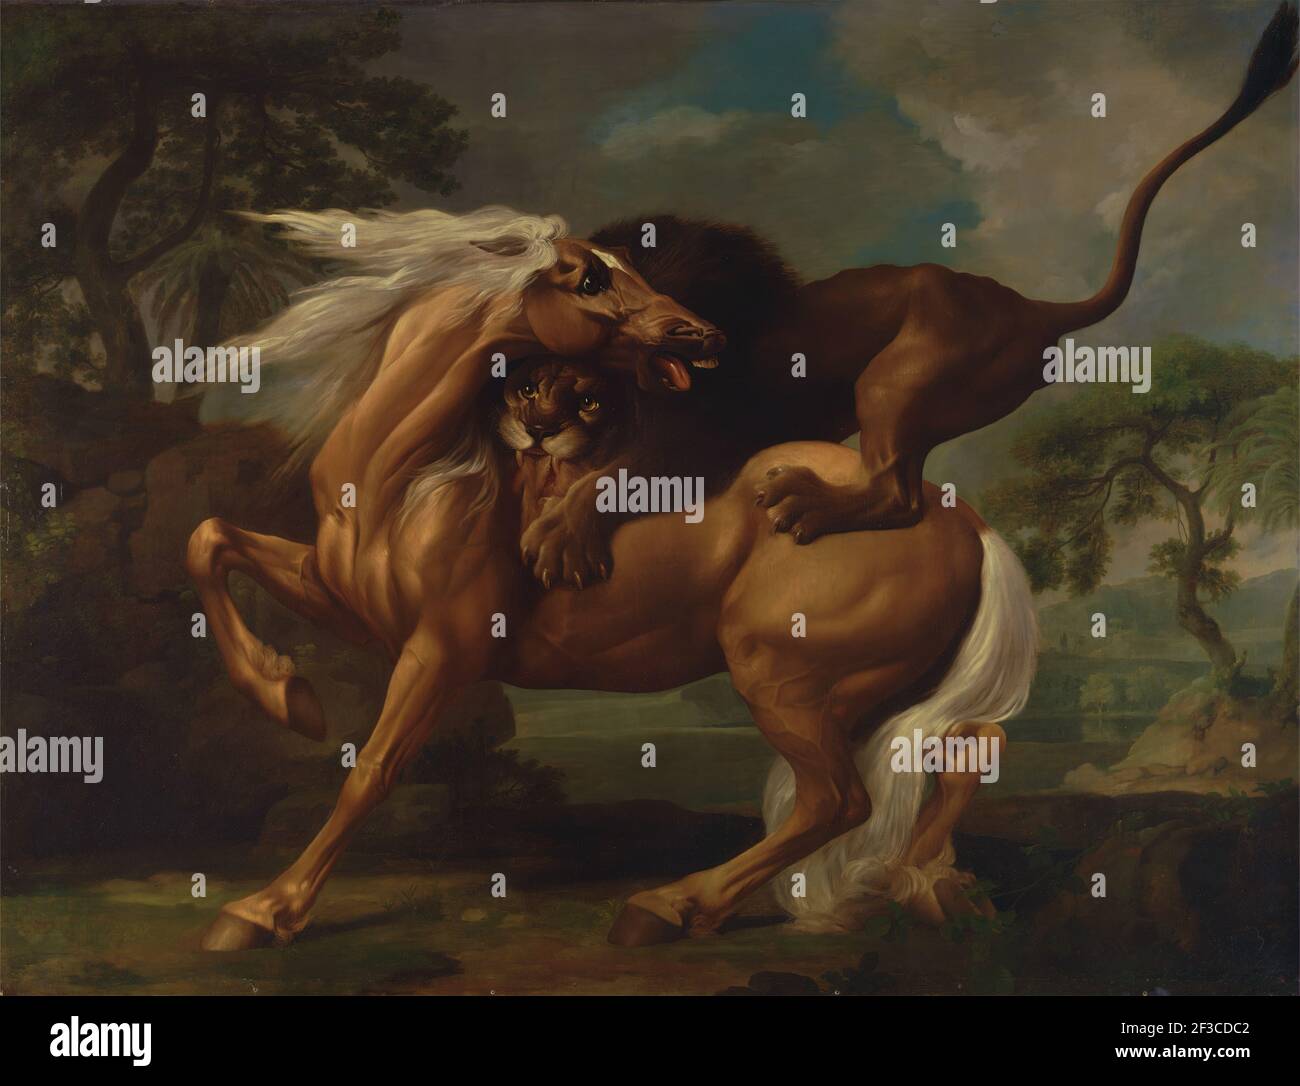 A Lion Attacking a Horse;Horse Attacked by a Lion;Lion devouring a horse;Lion Attacking a Horse, 1762. Stock Photo